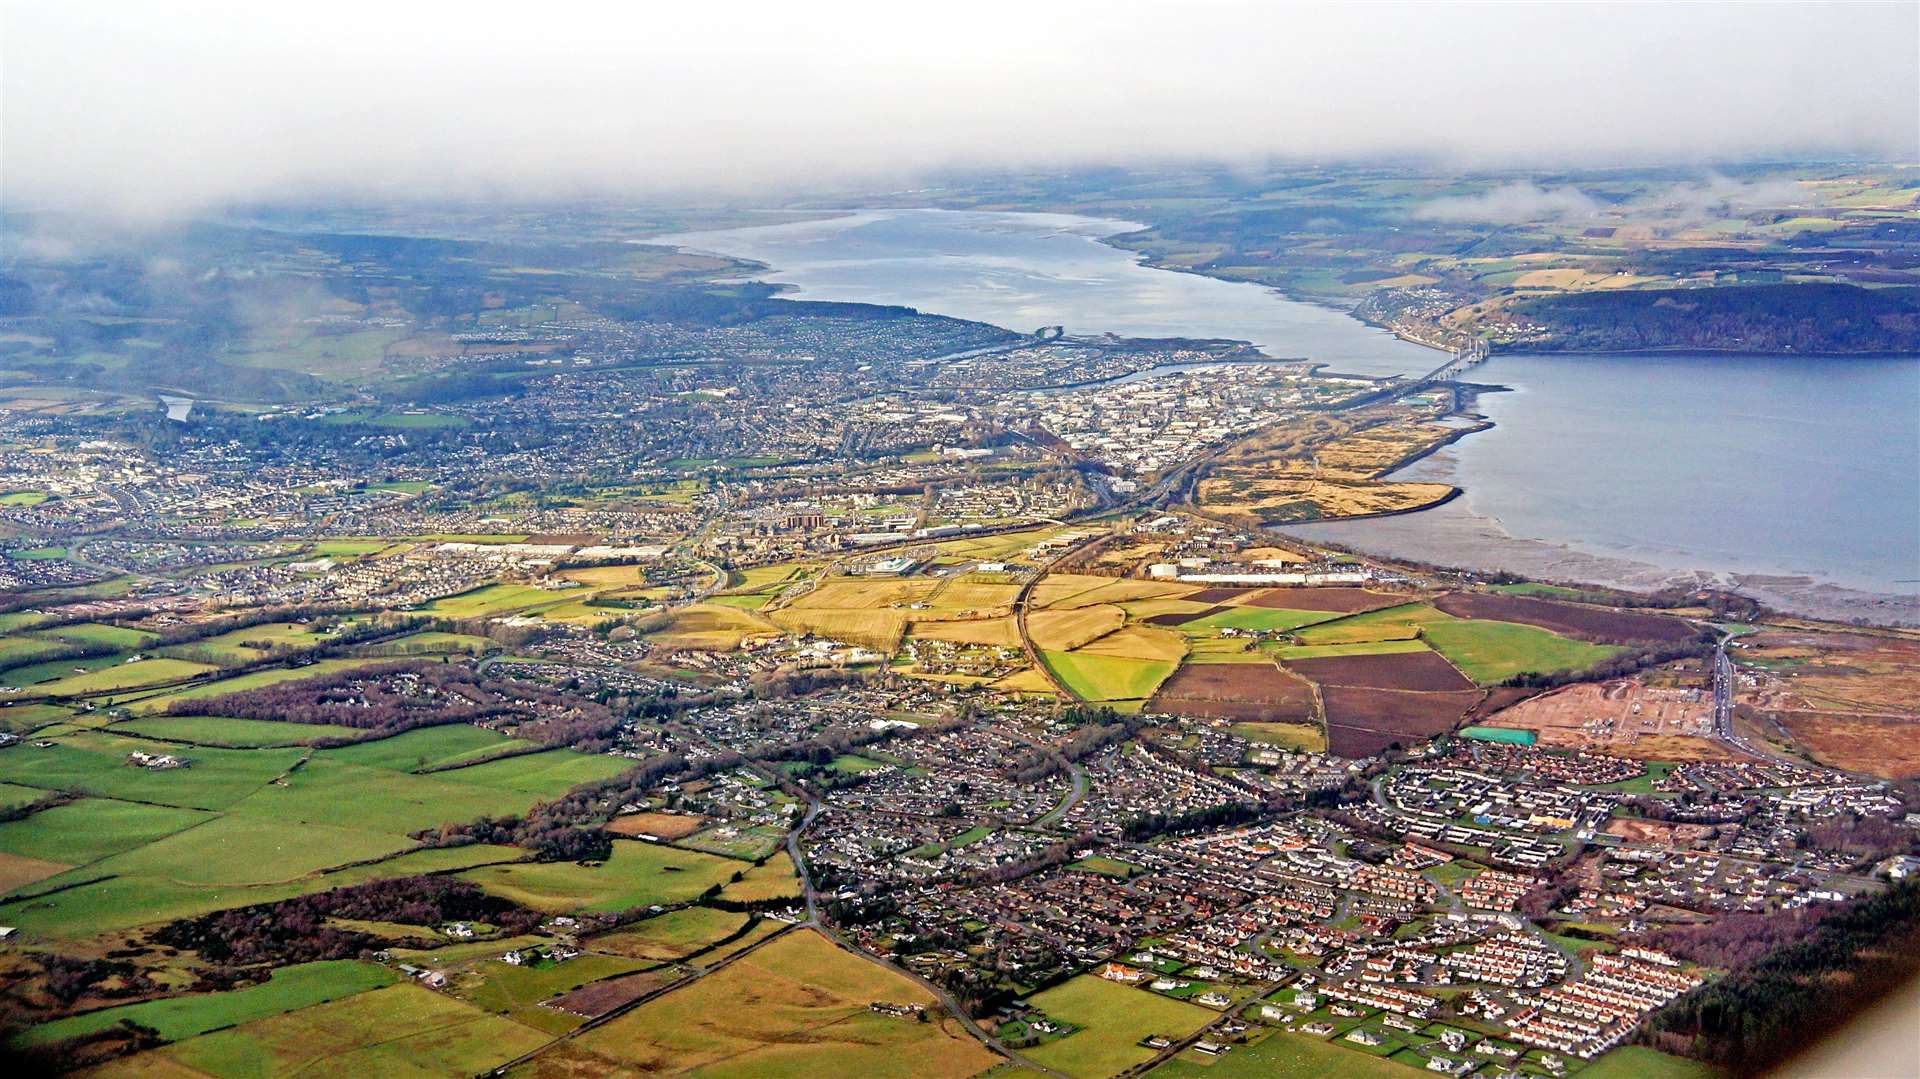 The wave of development across the wider Inverness area sparked the need for planners to draw up a 'wish list' of infrastructure to accompany future housing expansion.